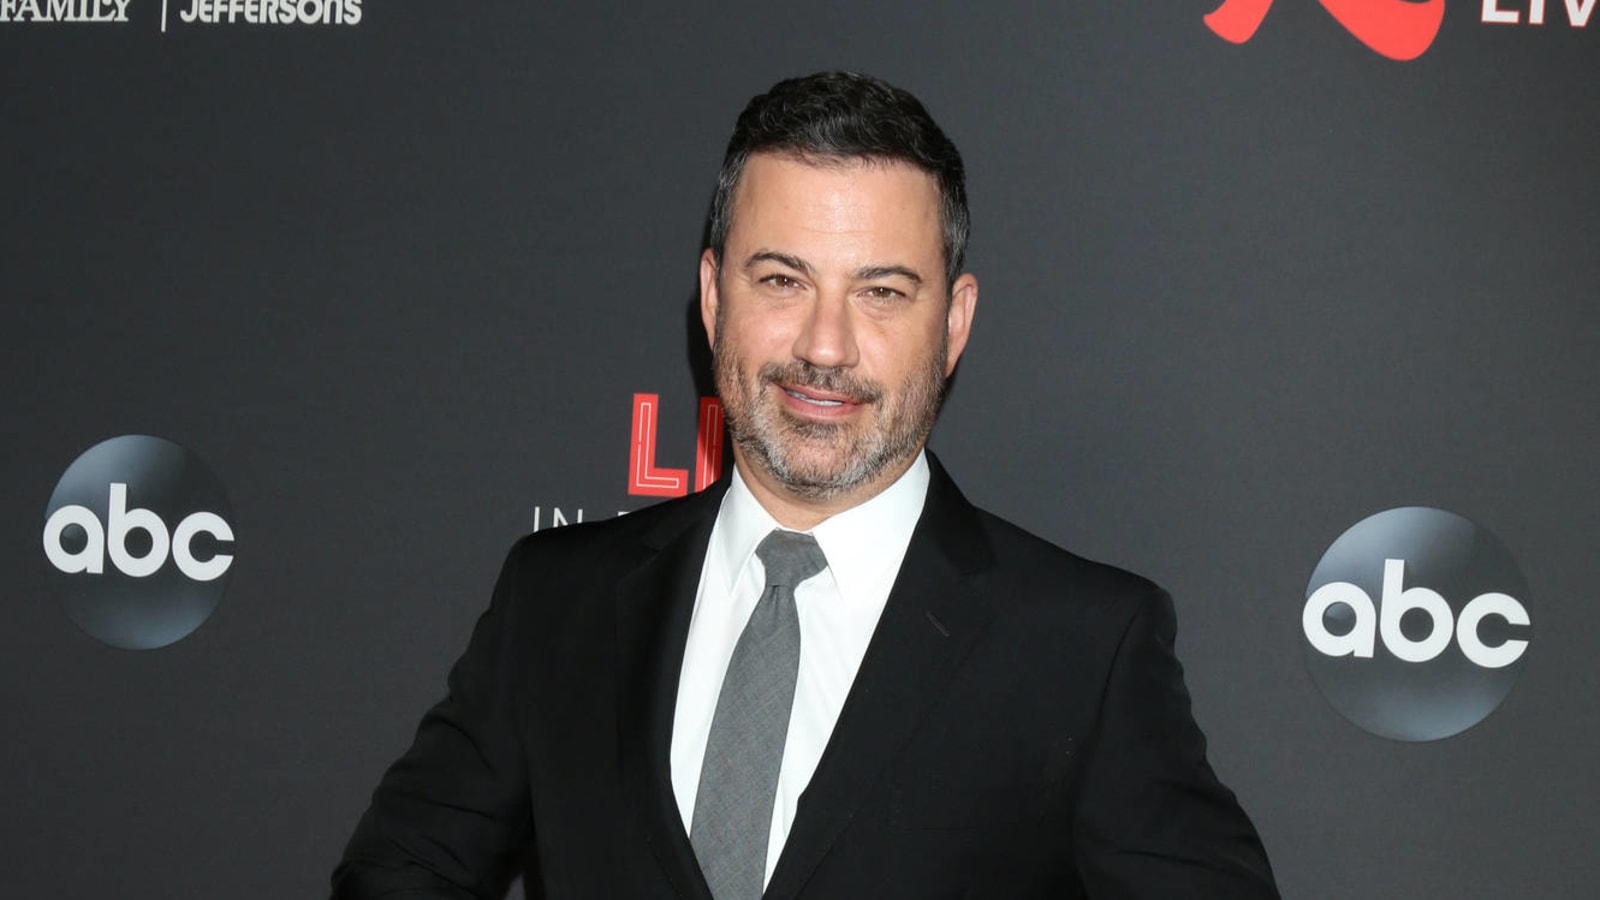 Jimmy Kimmel sneaks in jab at Jay Leno while bidding ‘Conan’ farewell